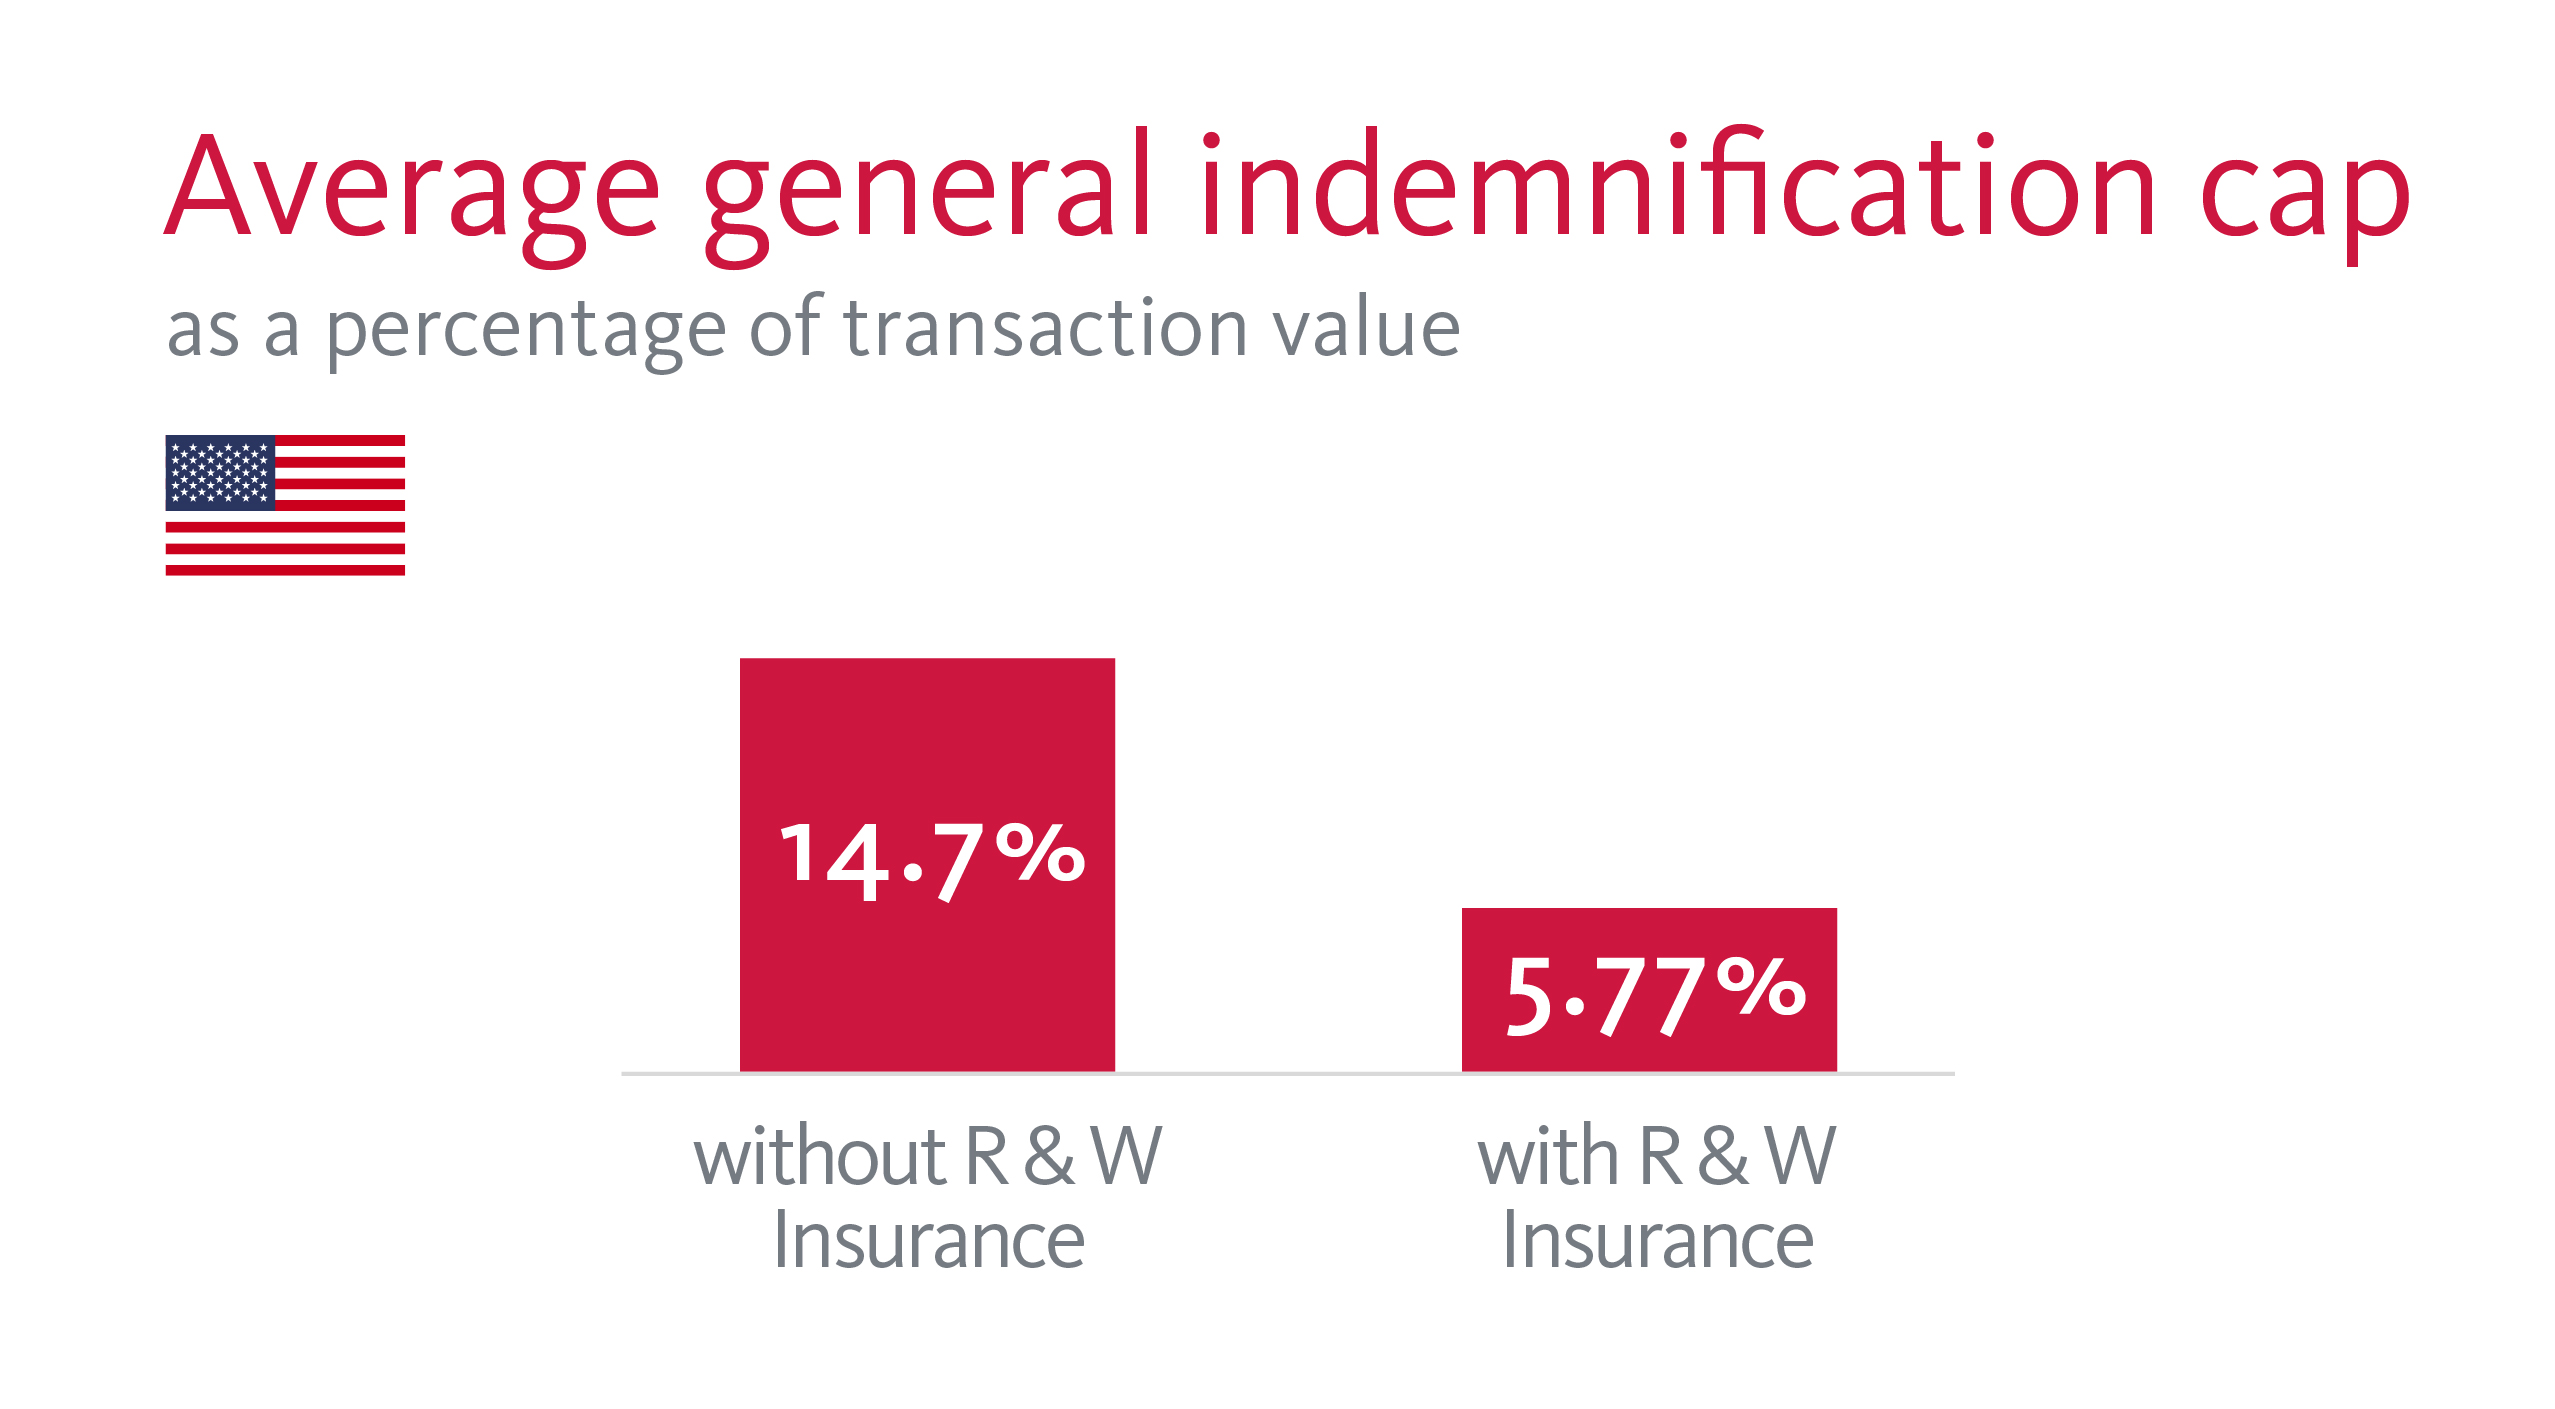 Average general indemnification cap as a percentage of transaction value